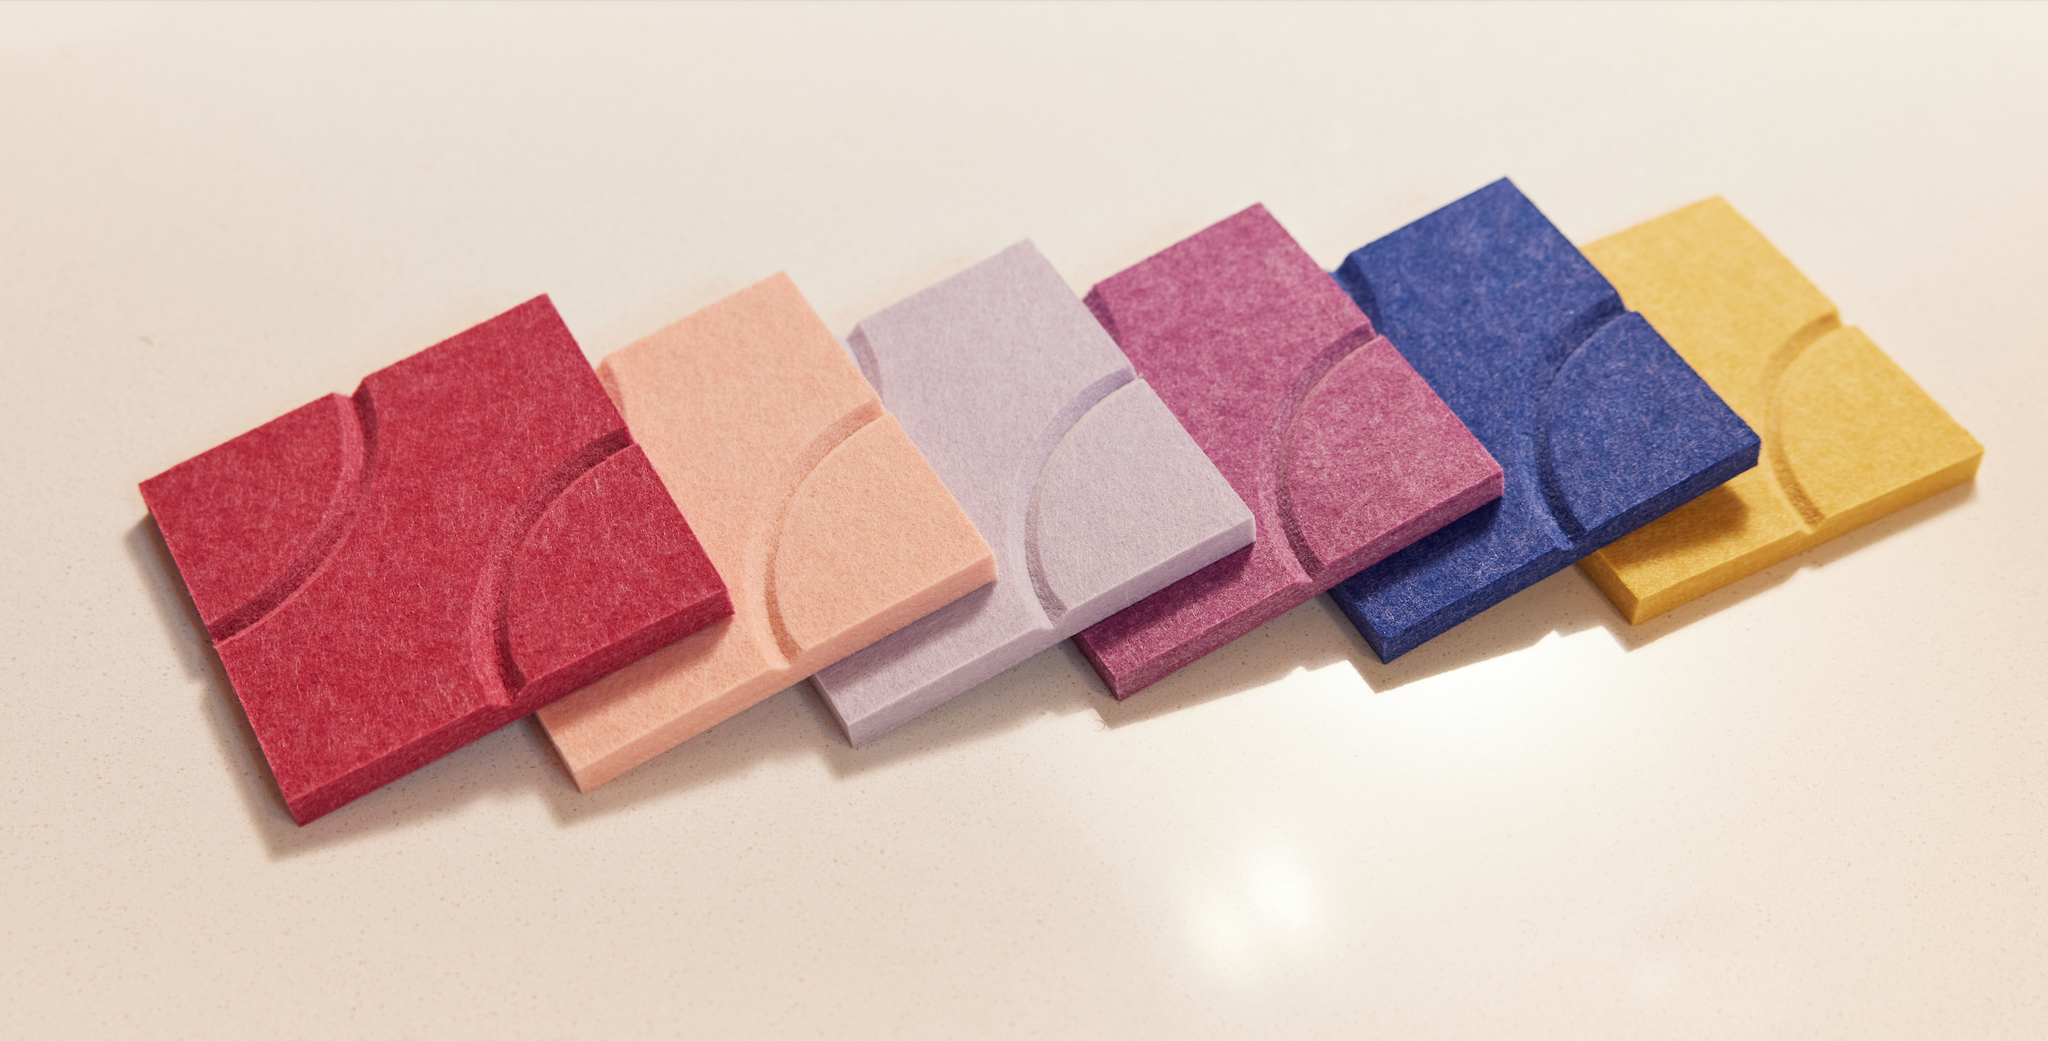 6 Felt Right coasters all in a line. Pink, purple, blue, and yellow coaster pack.